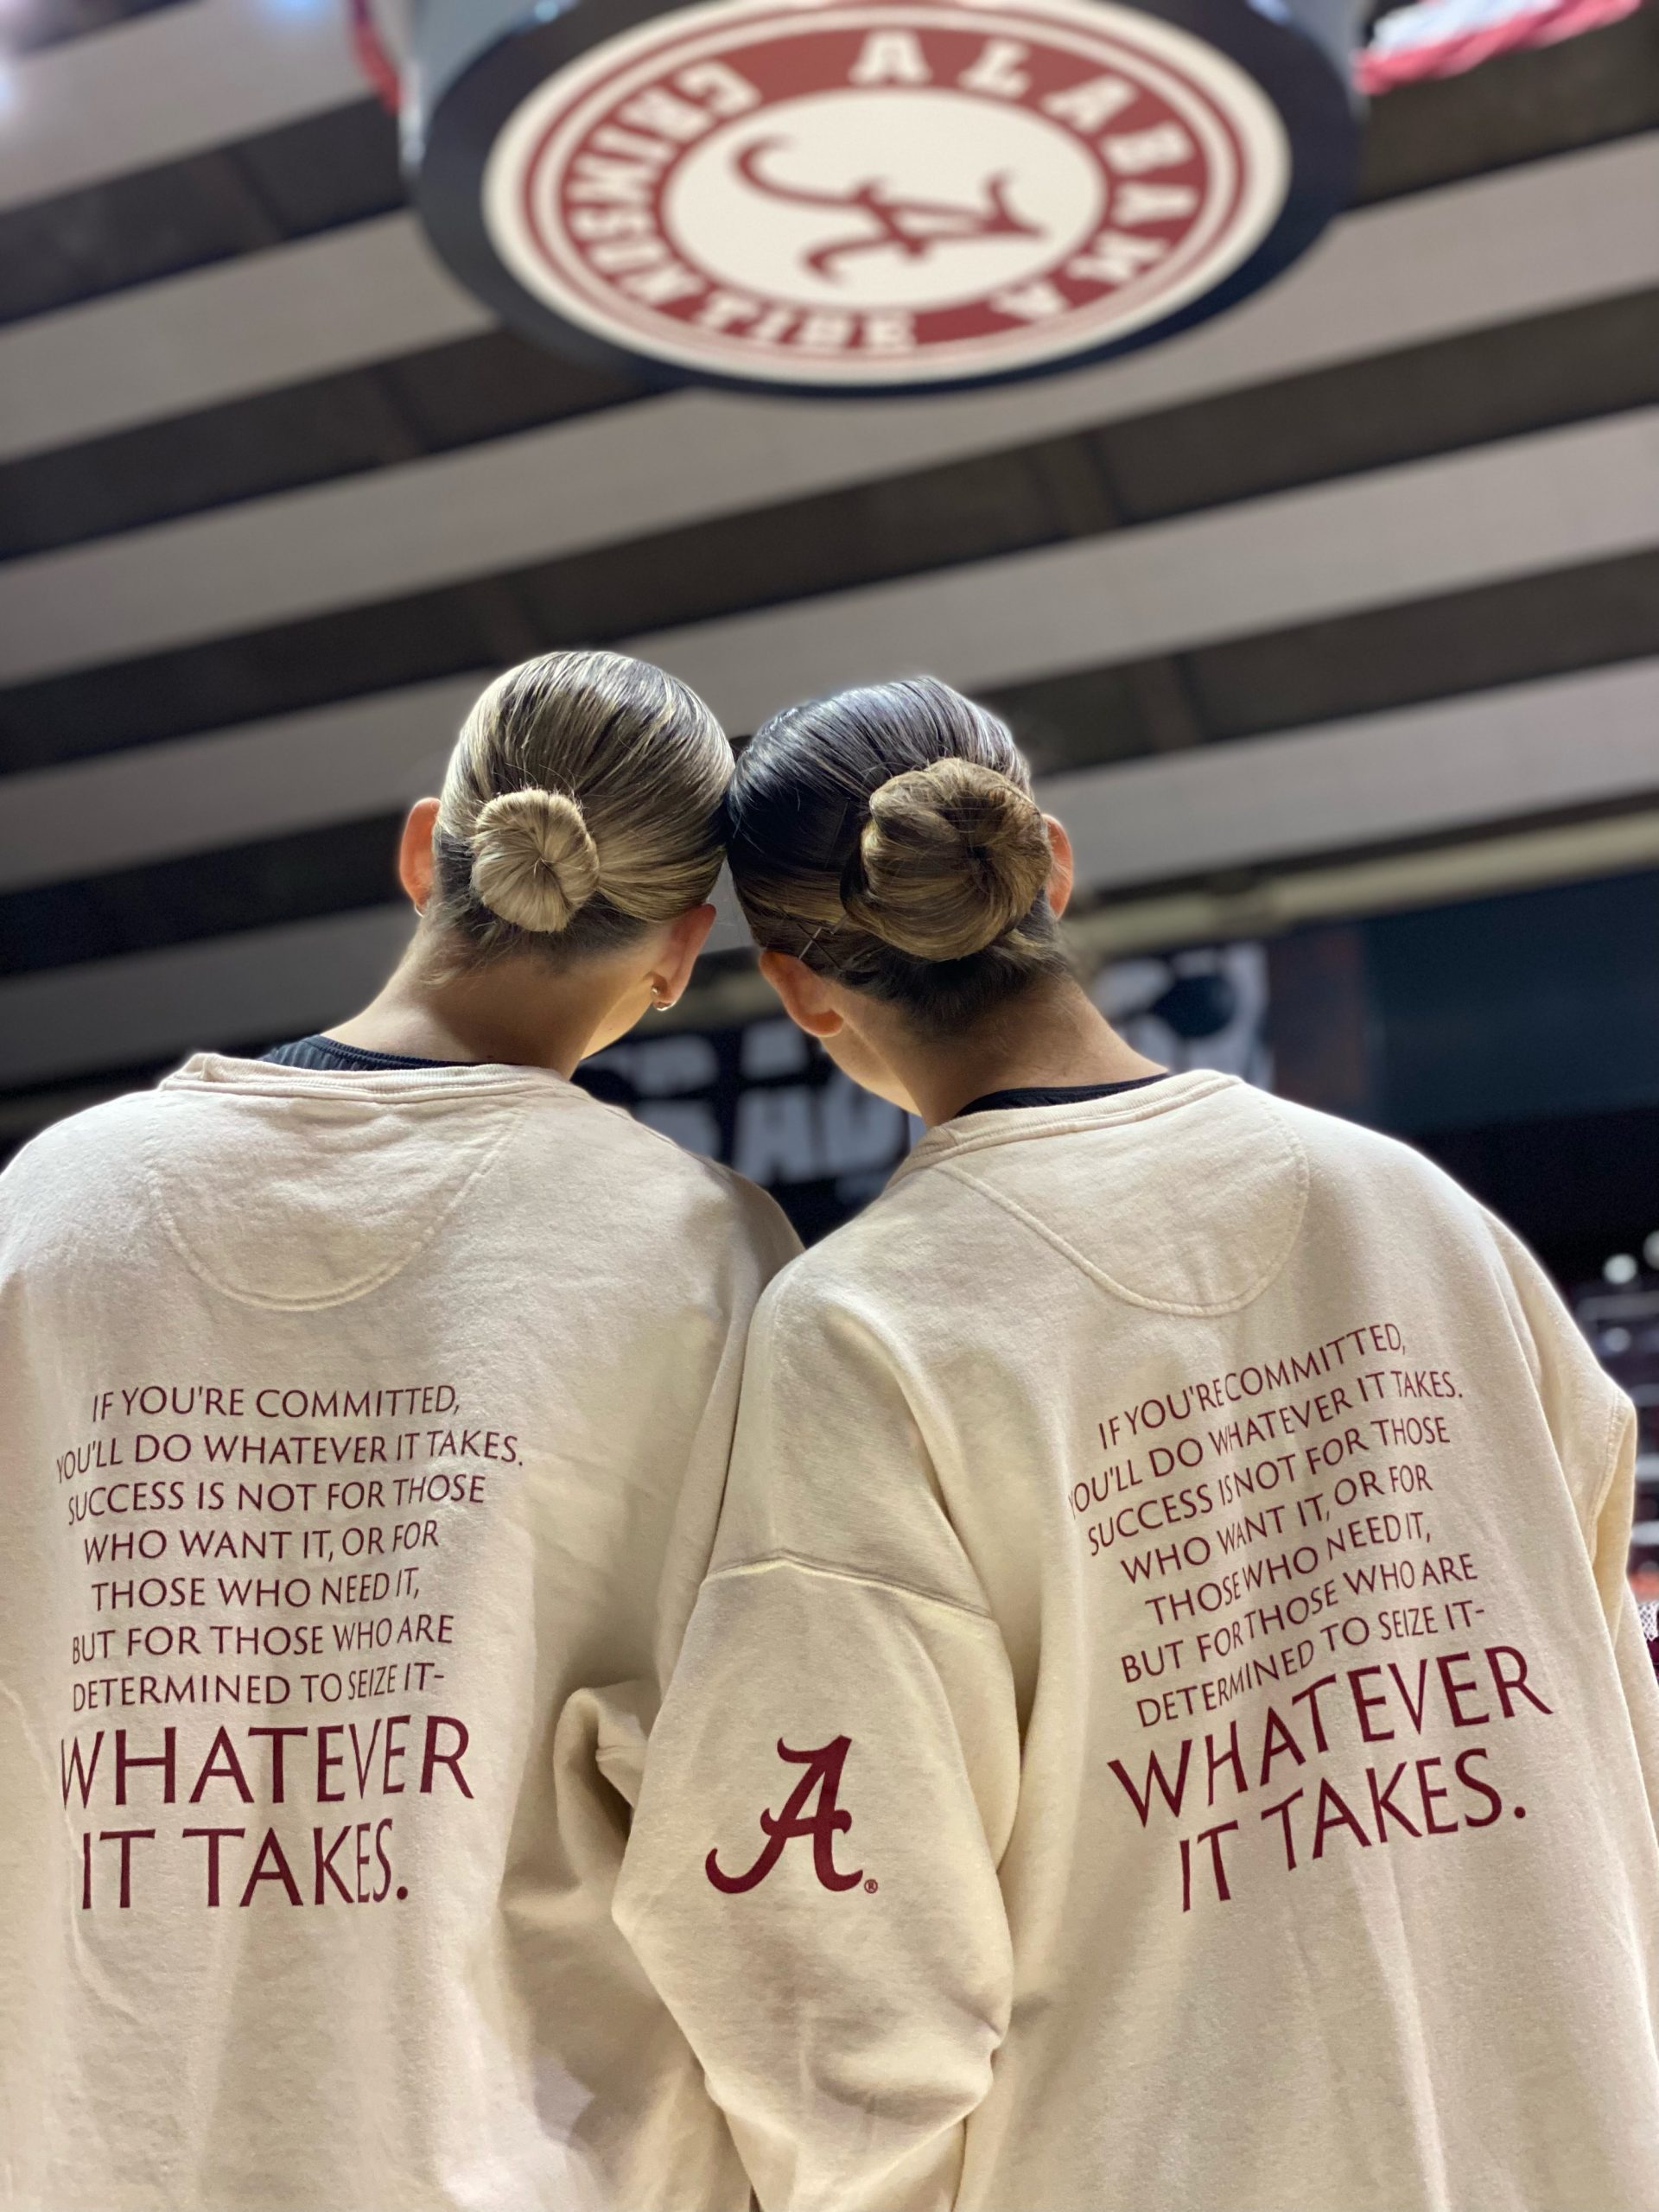 Whatever it Takes: The Alabama Dance Team